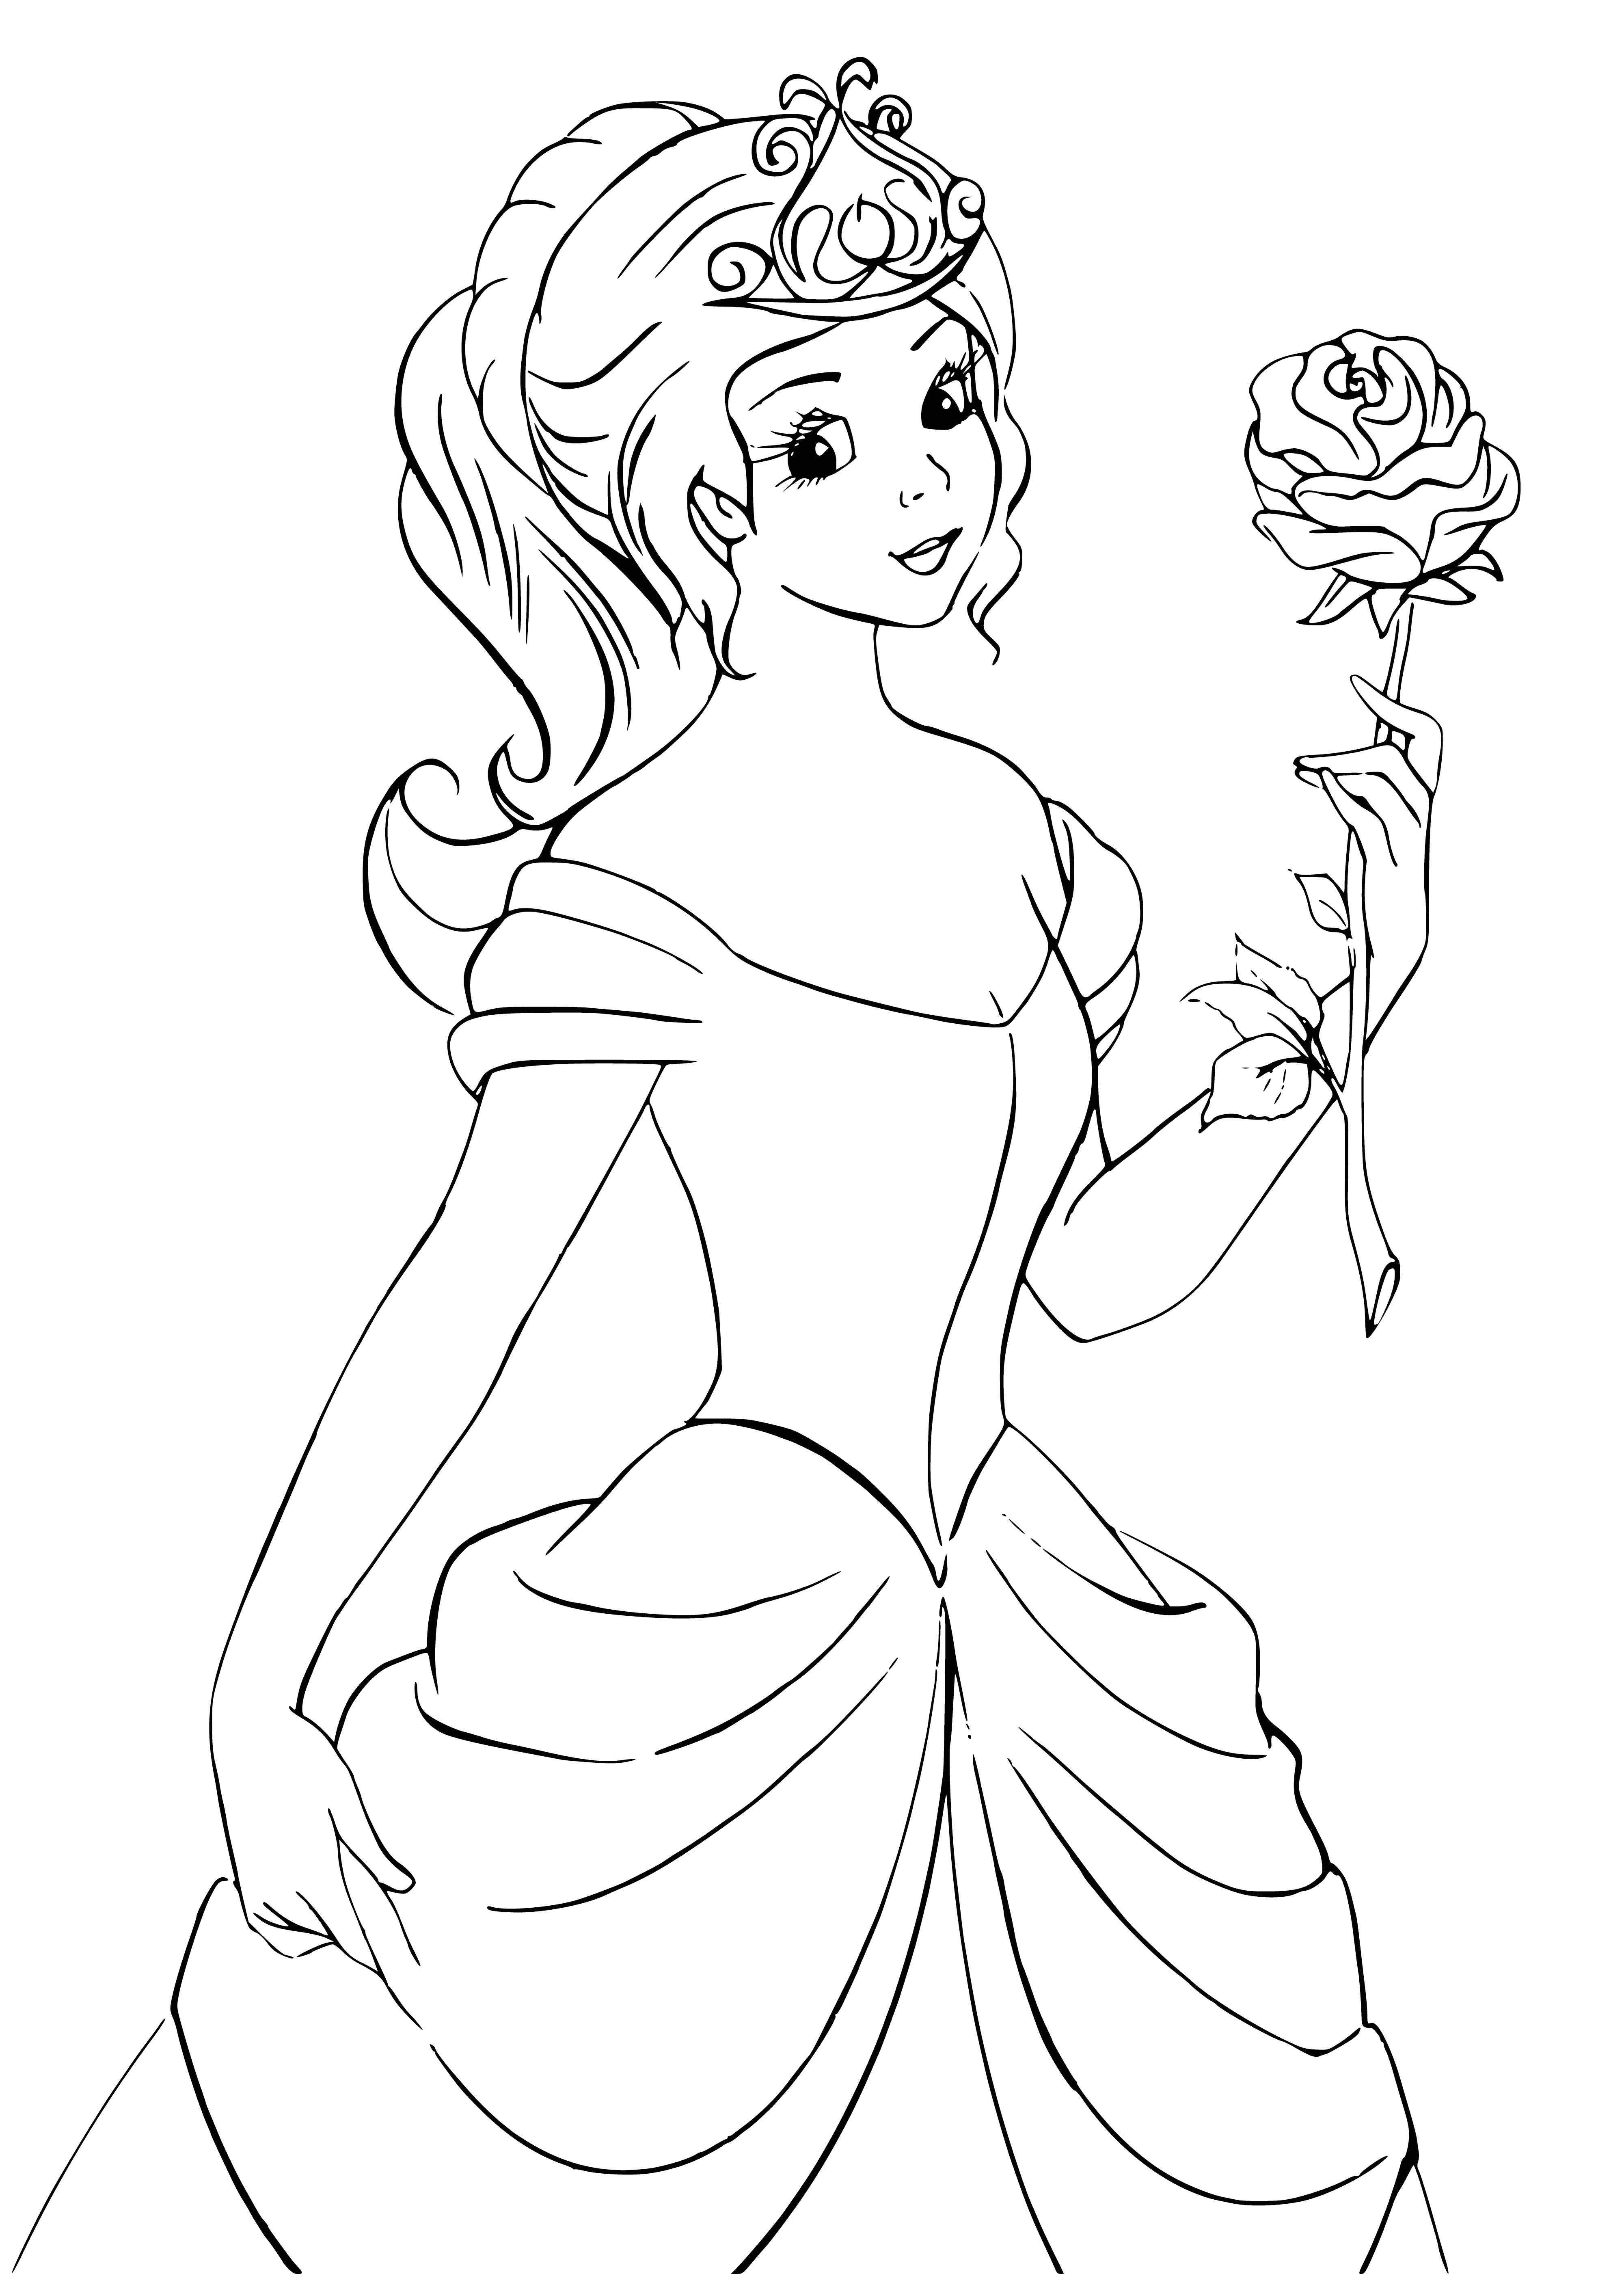 coloring page: Princess holds rose, looks happy and content.